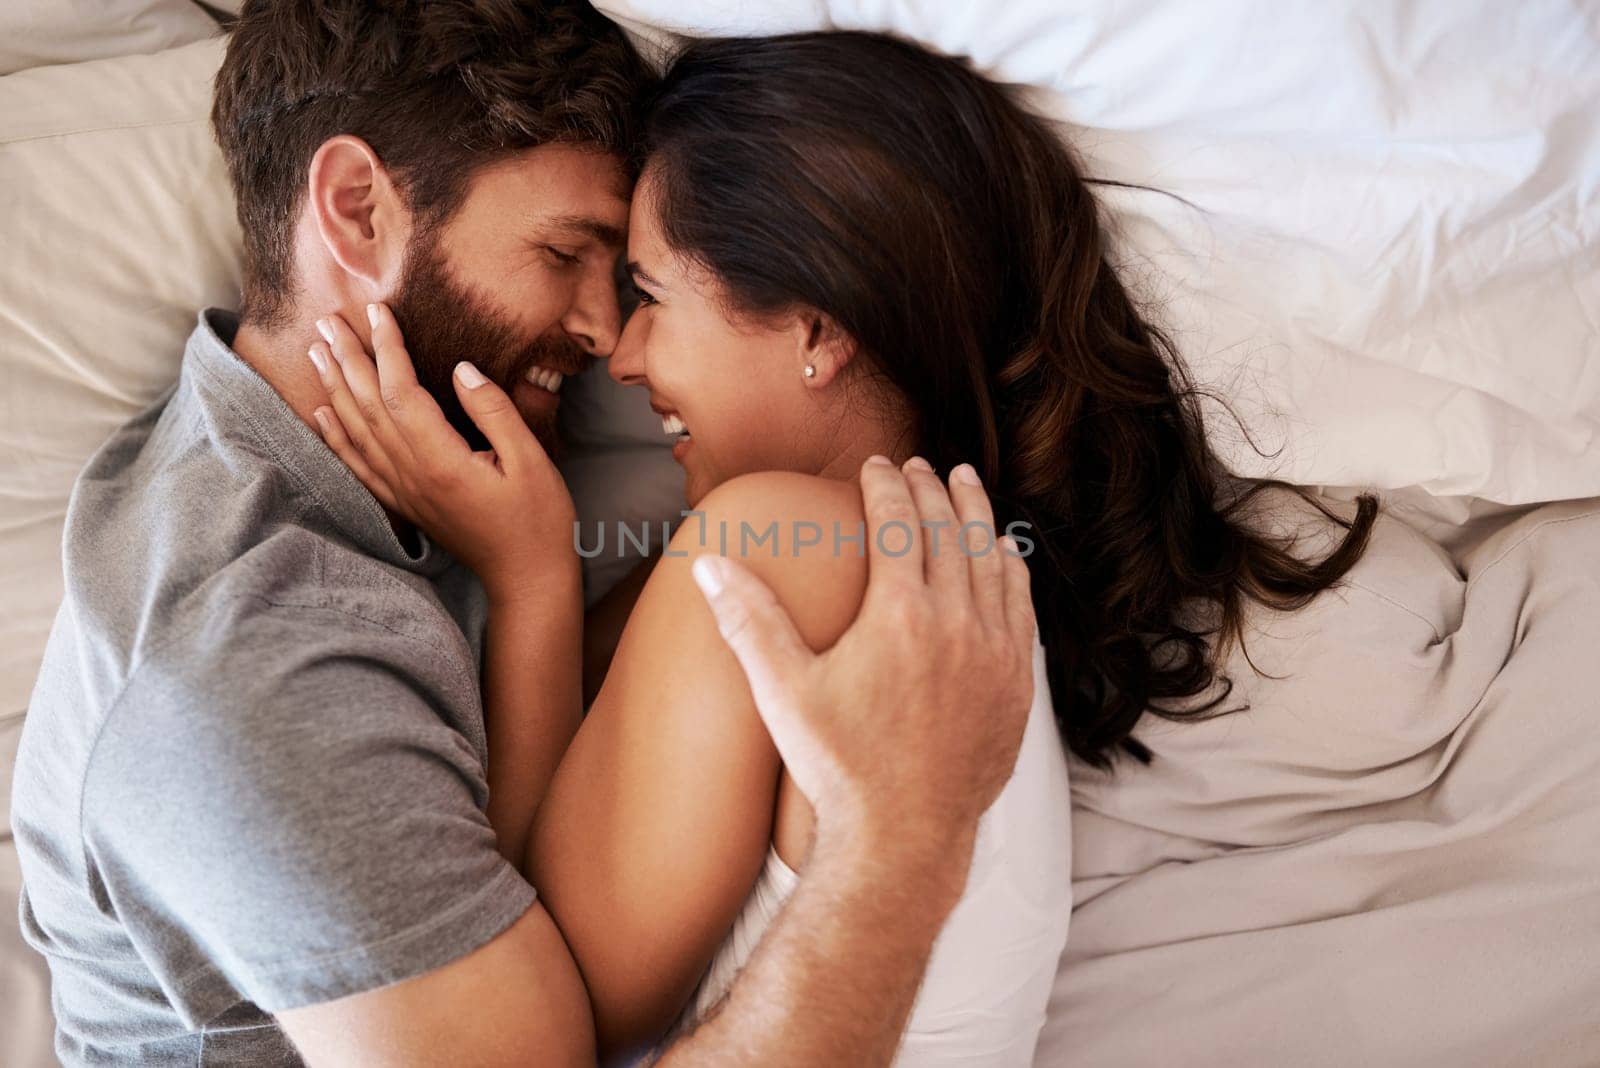 Morning, bedroom hug and happy couple laugh at funny joke, relationship humor or comedy on honeymoon vacation. Affection, marriage and top view of relax man, woman or bonding people laughing in bed.